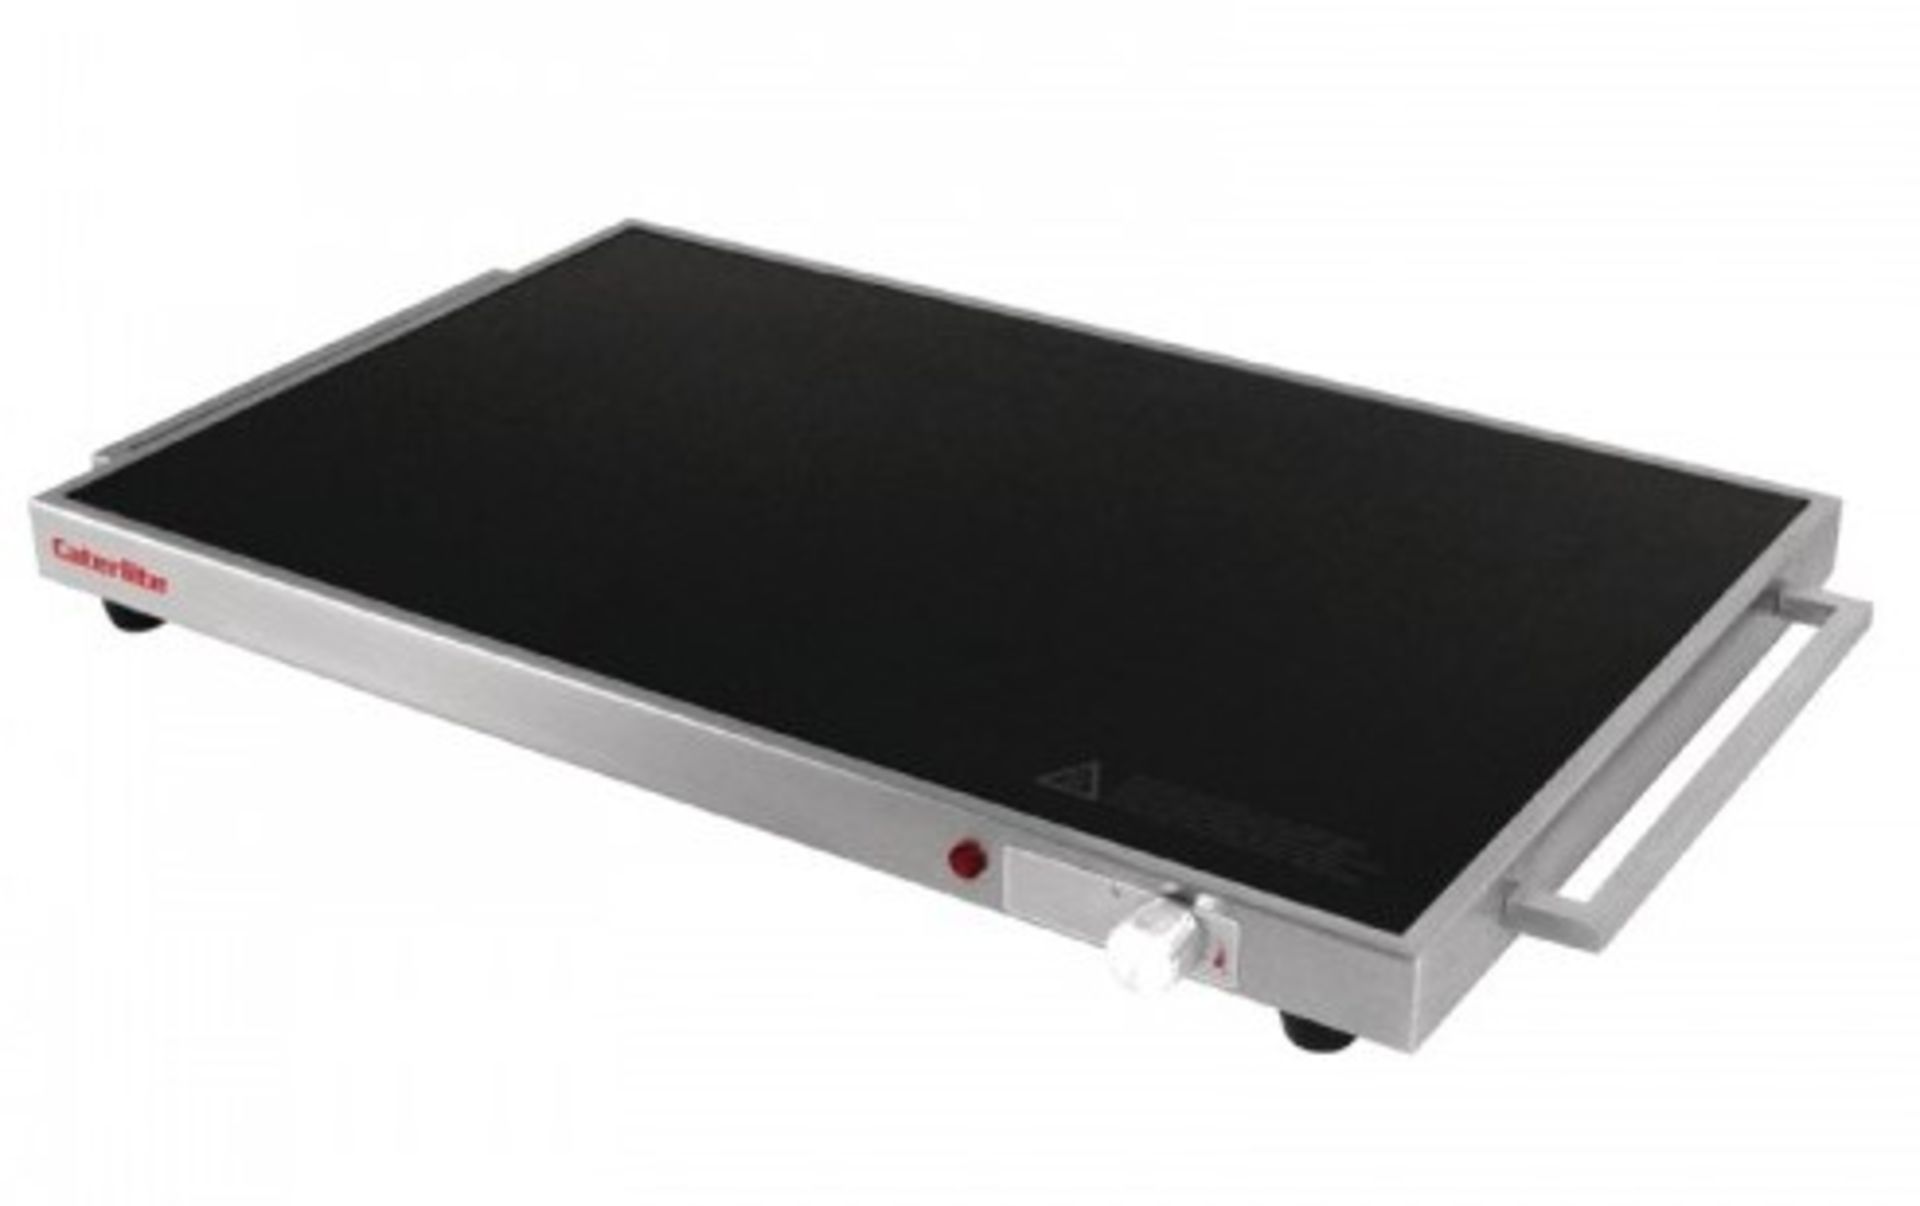 1 x Caterlite Hot Plate Food Warmer - Model CD562 - Brand New and Boxed - Ref LD226 B2 - CL409 -